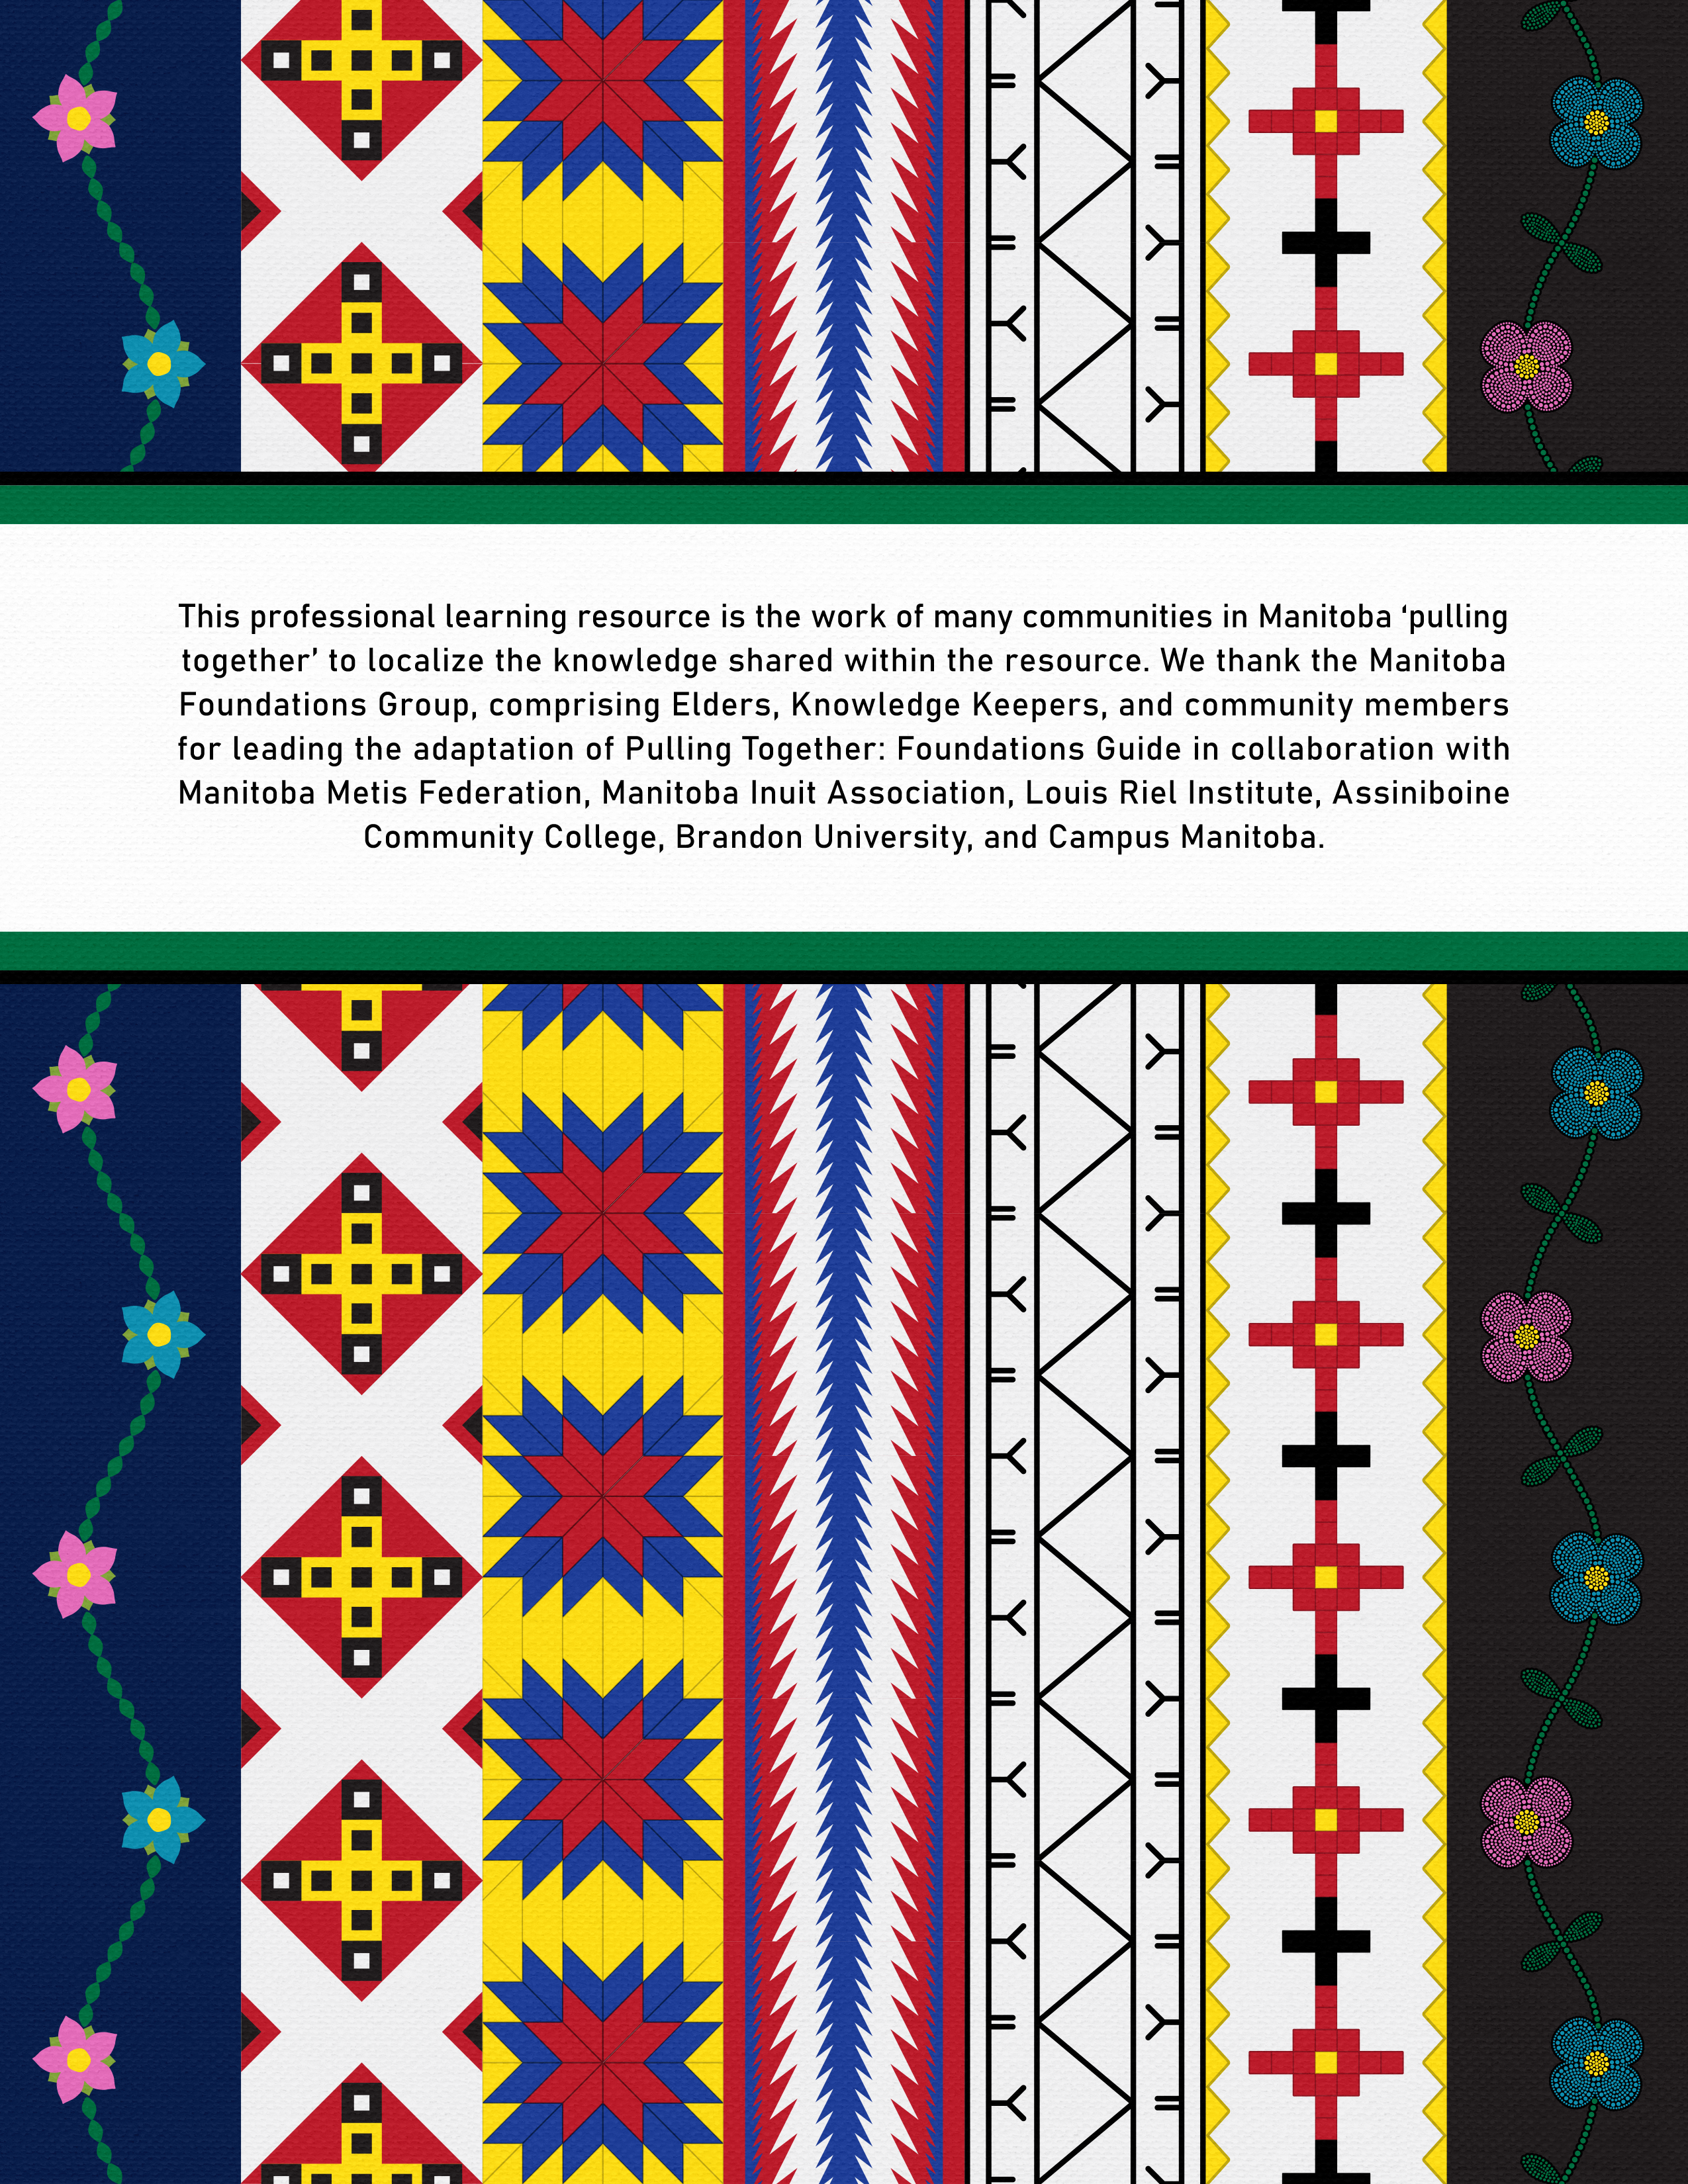 Back cover, decorative indigenous patterns, thank you text of adaptation of this guide, collaboration of multiple Manitoba groups, associations, institutions, colleges